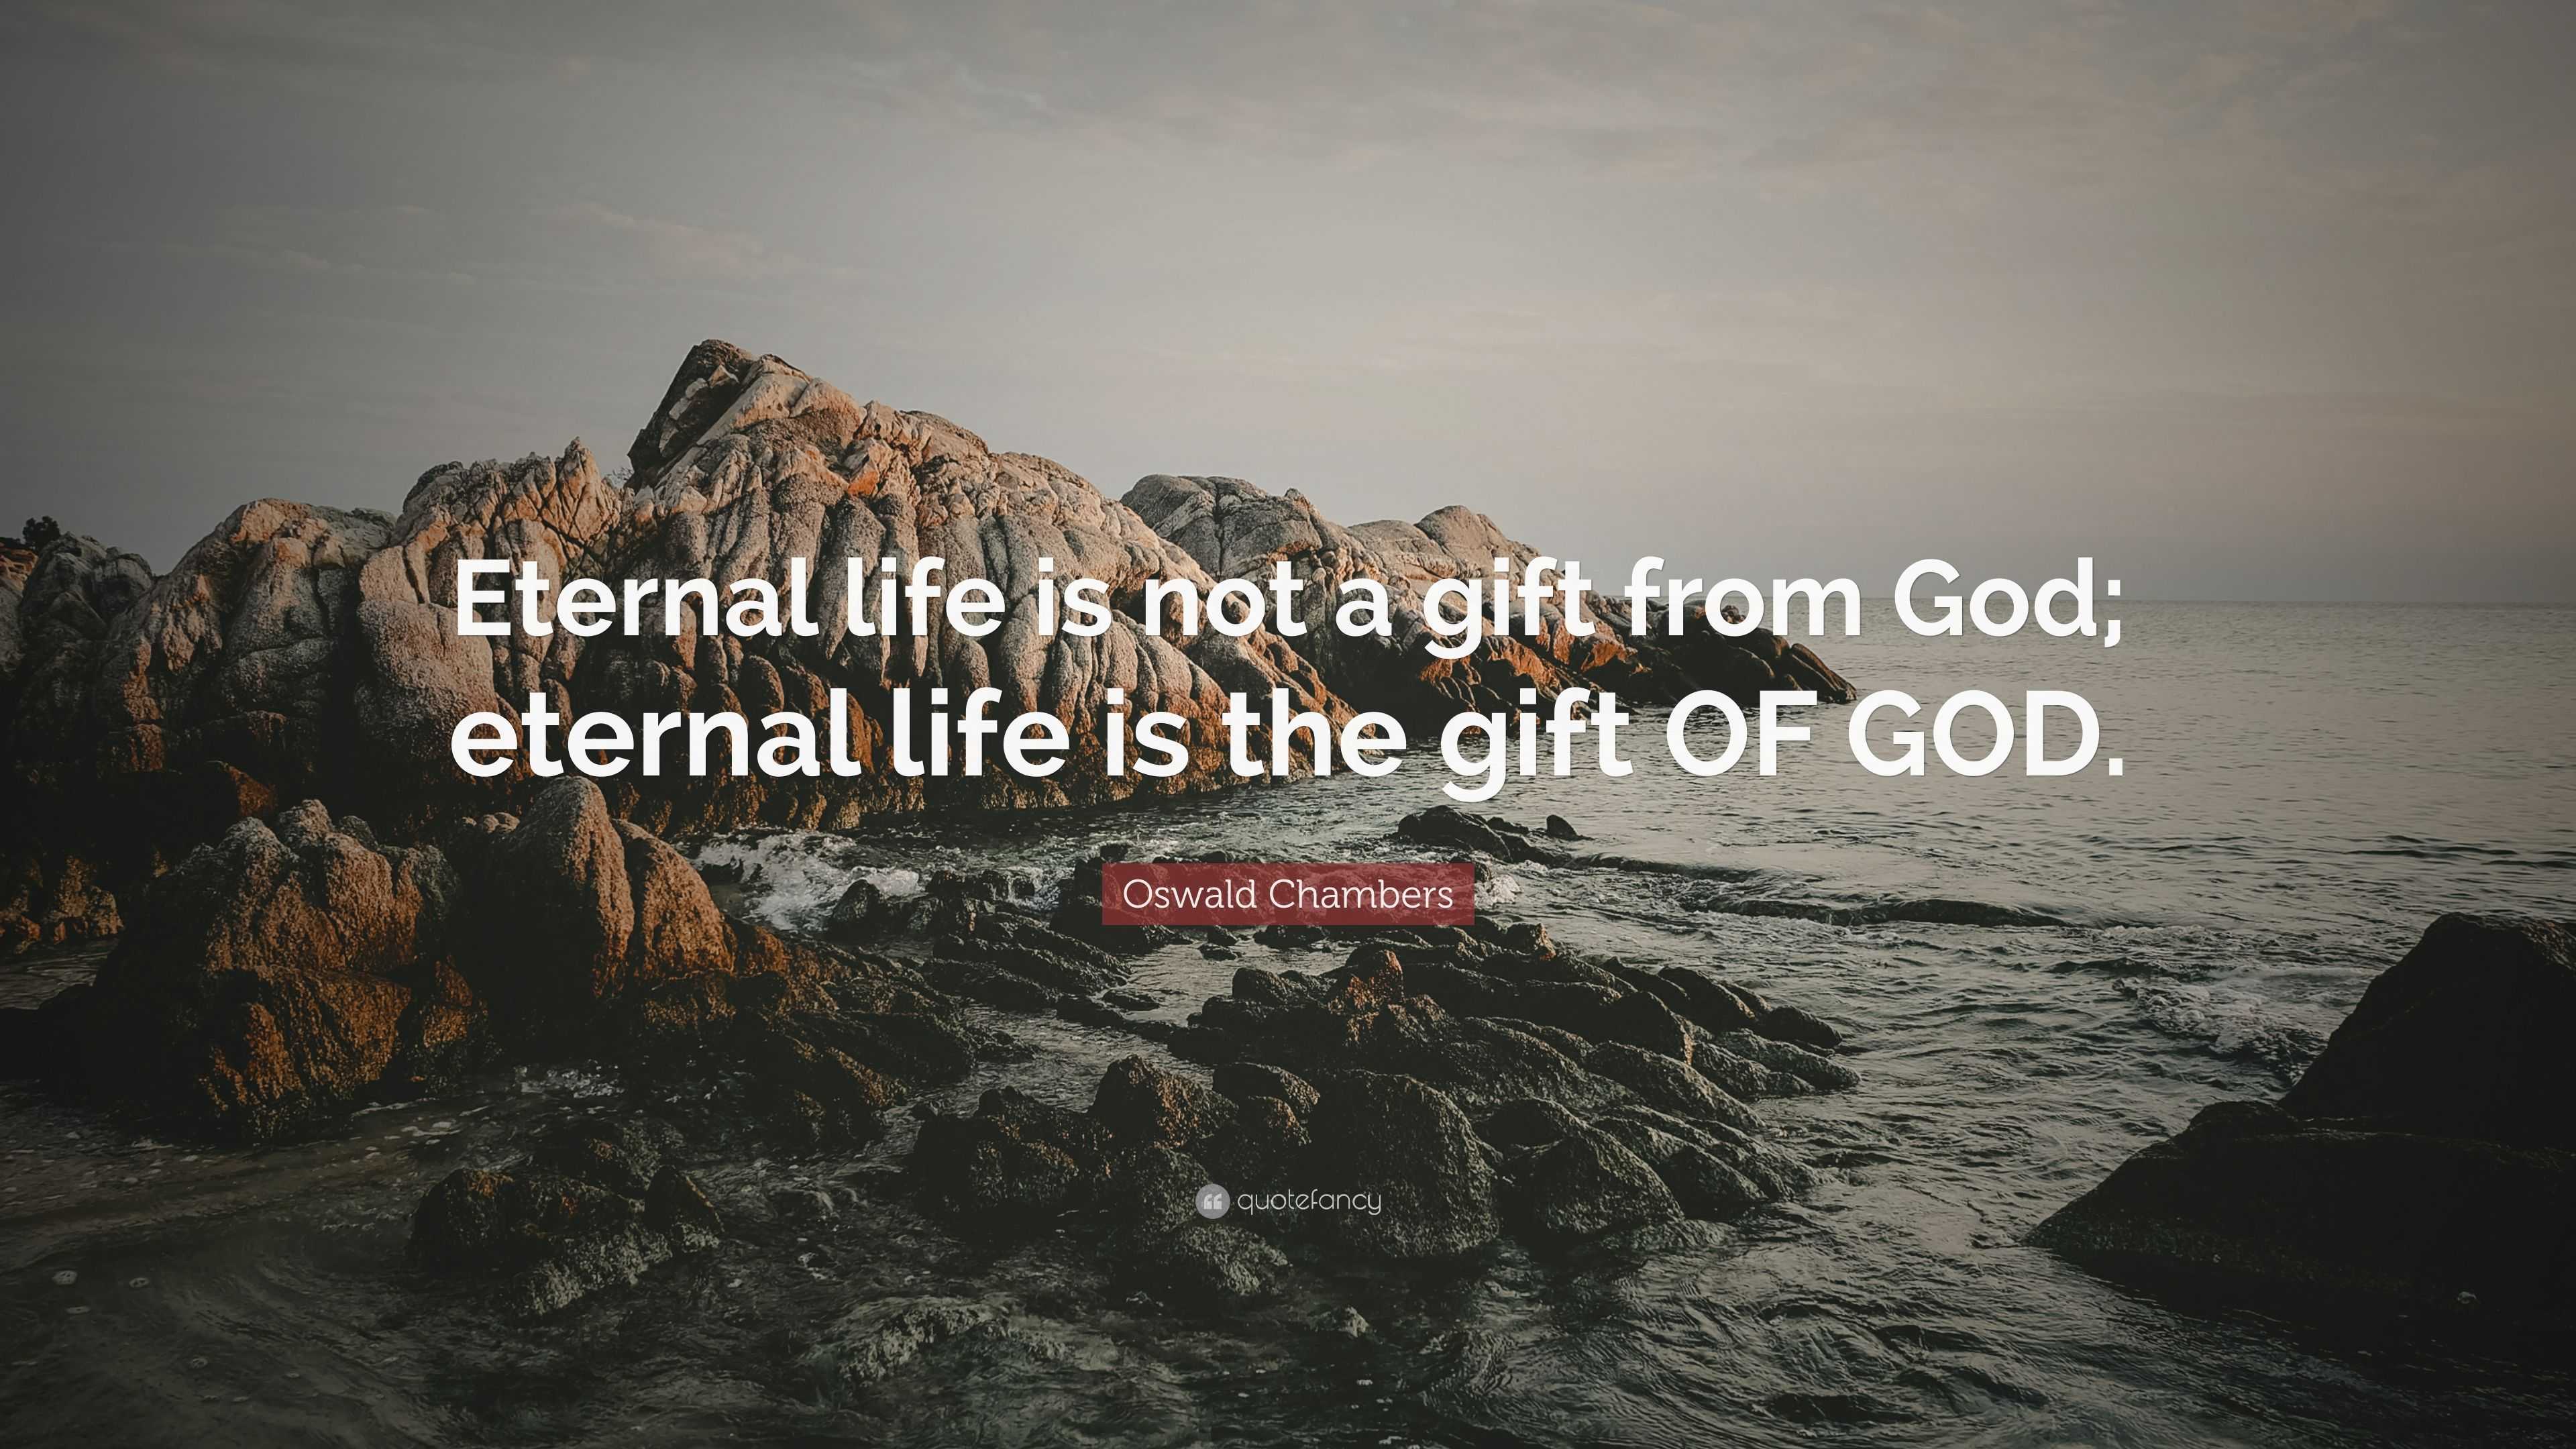 Oswald Chambers Quote “Eternal life is not a gift from God; eternal